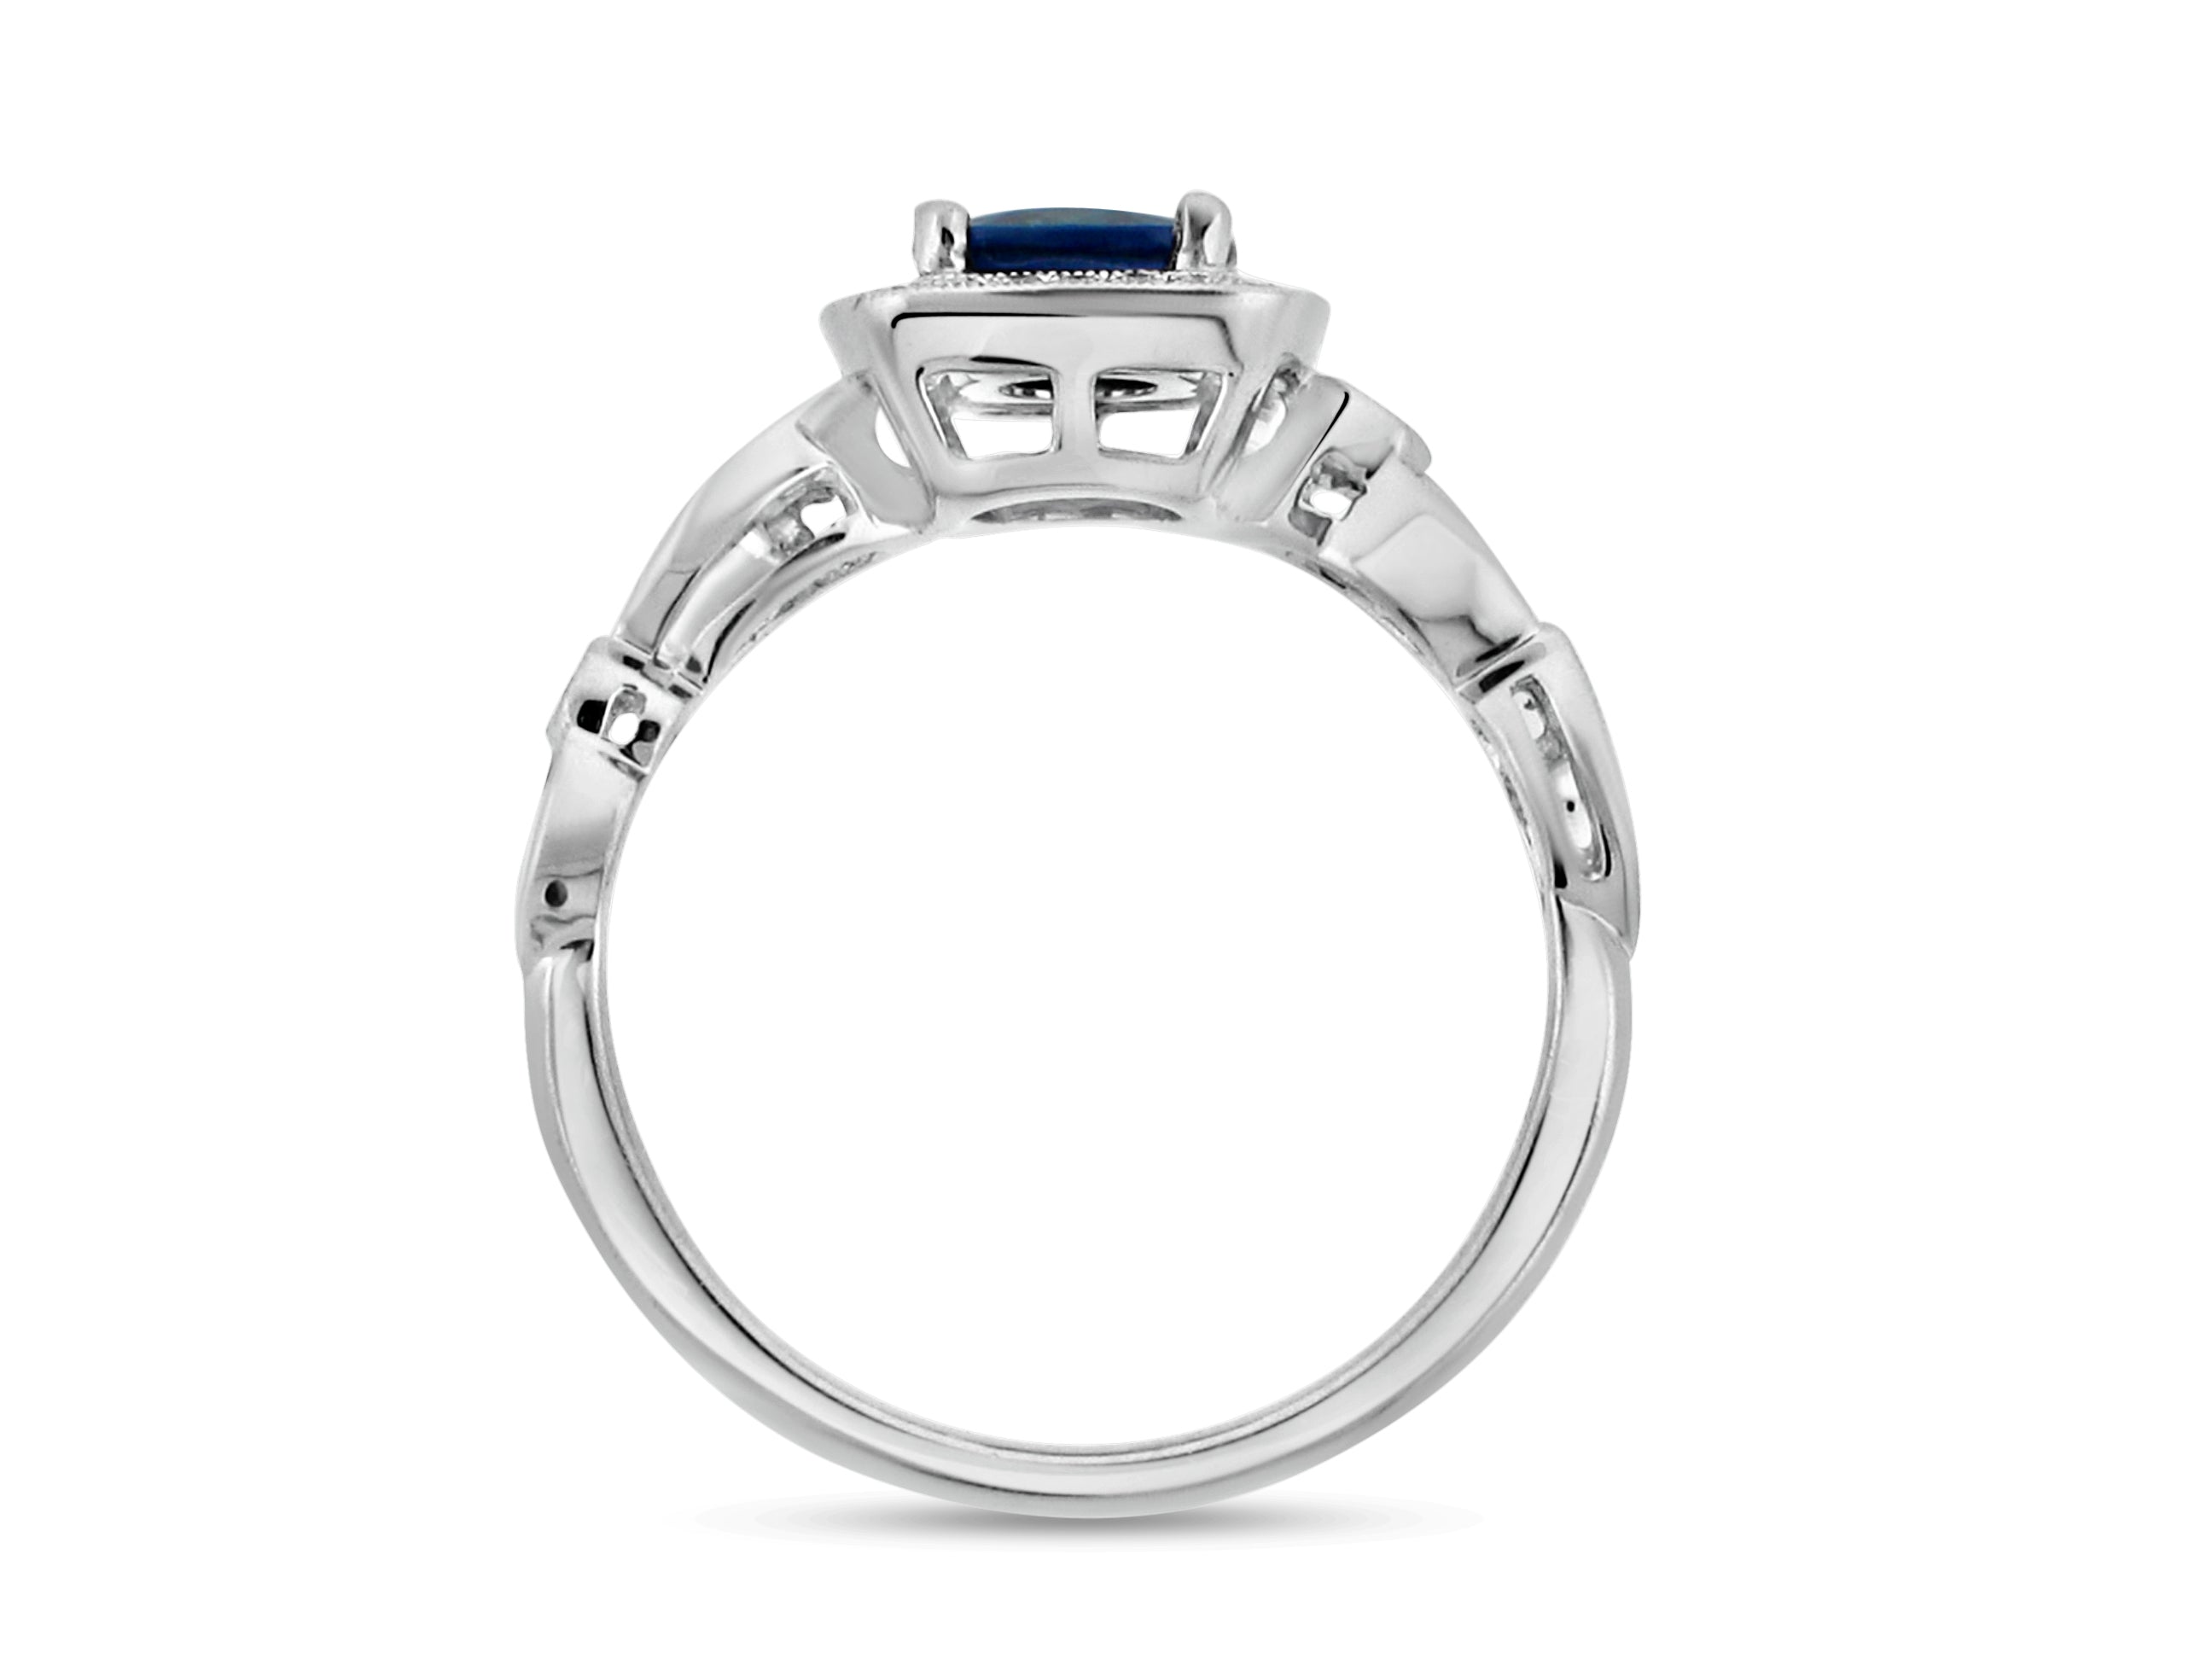 SIMON G PLATINUM 0.16CT VS/G DIAMOND ENGAGEMENT RING MOUNTING WITH .85CT A+ SAPPHIRE CUSHION.